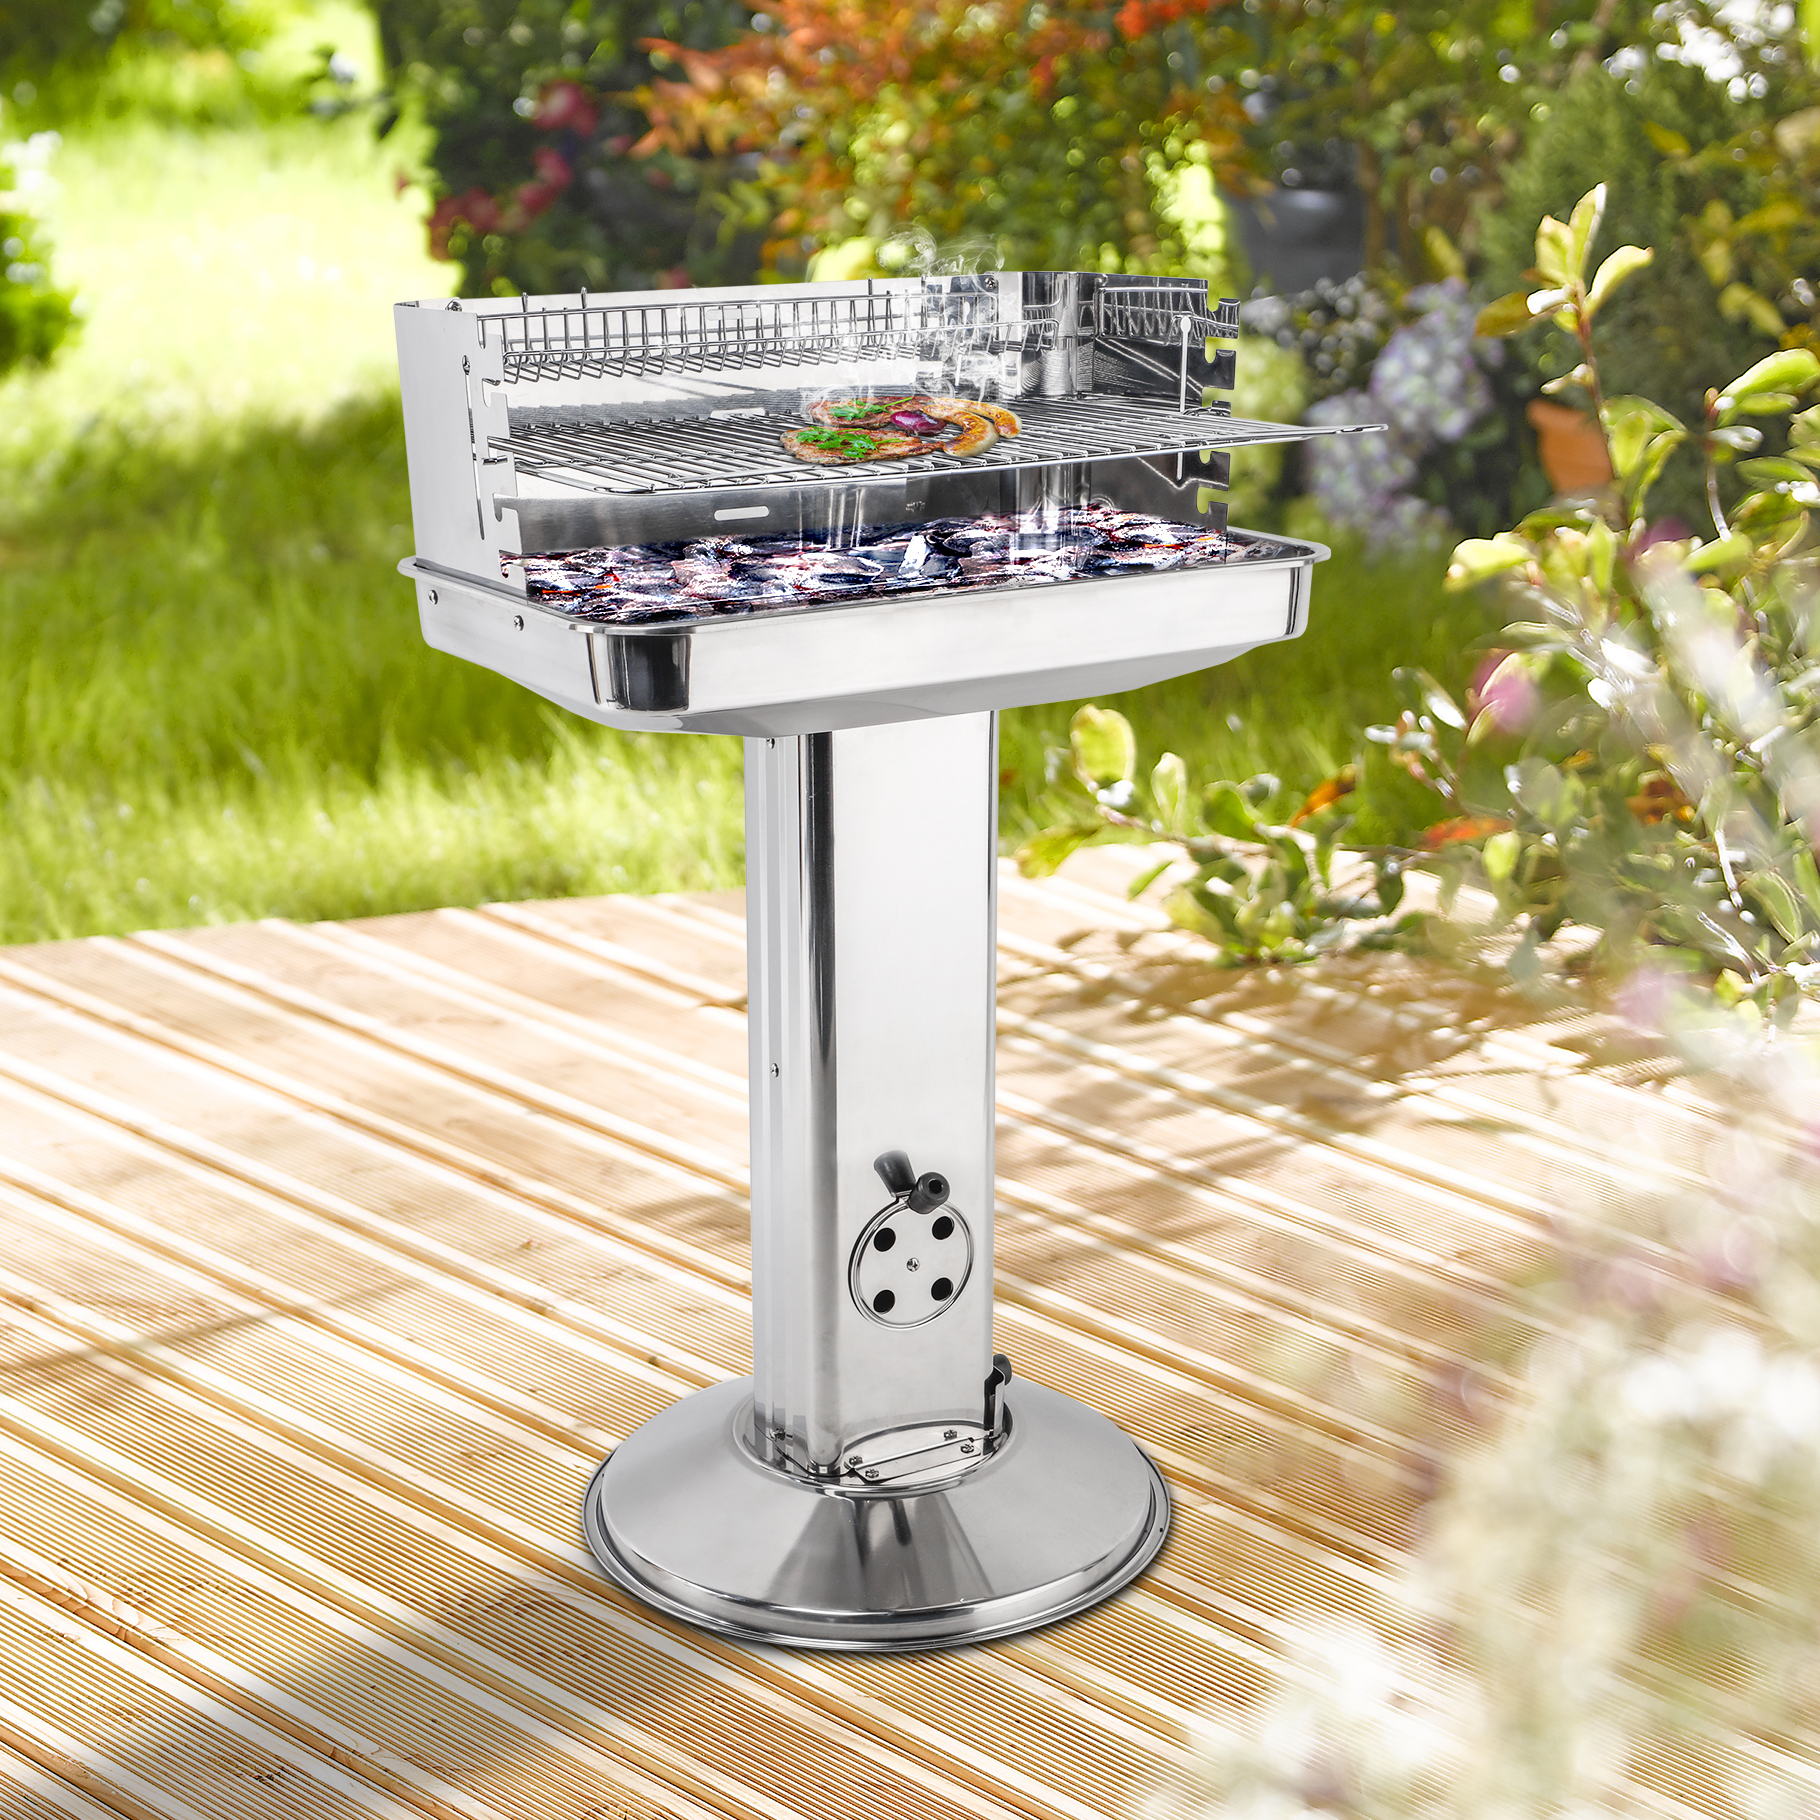 Product category - Grills & Zubehör